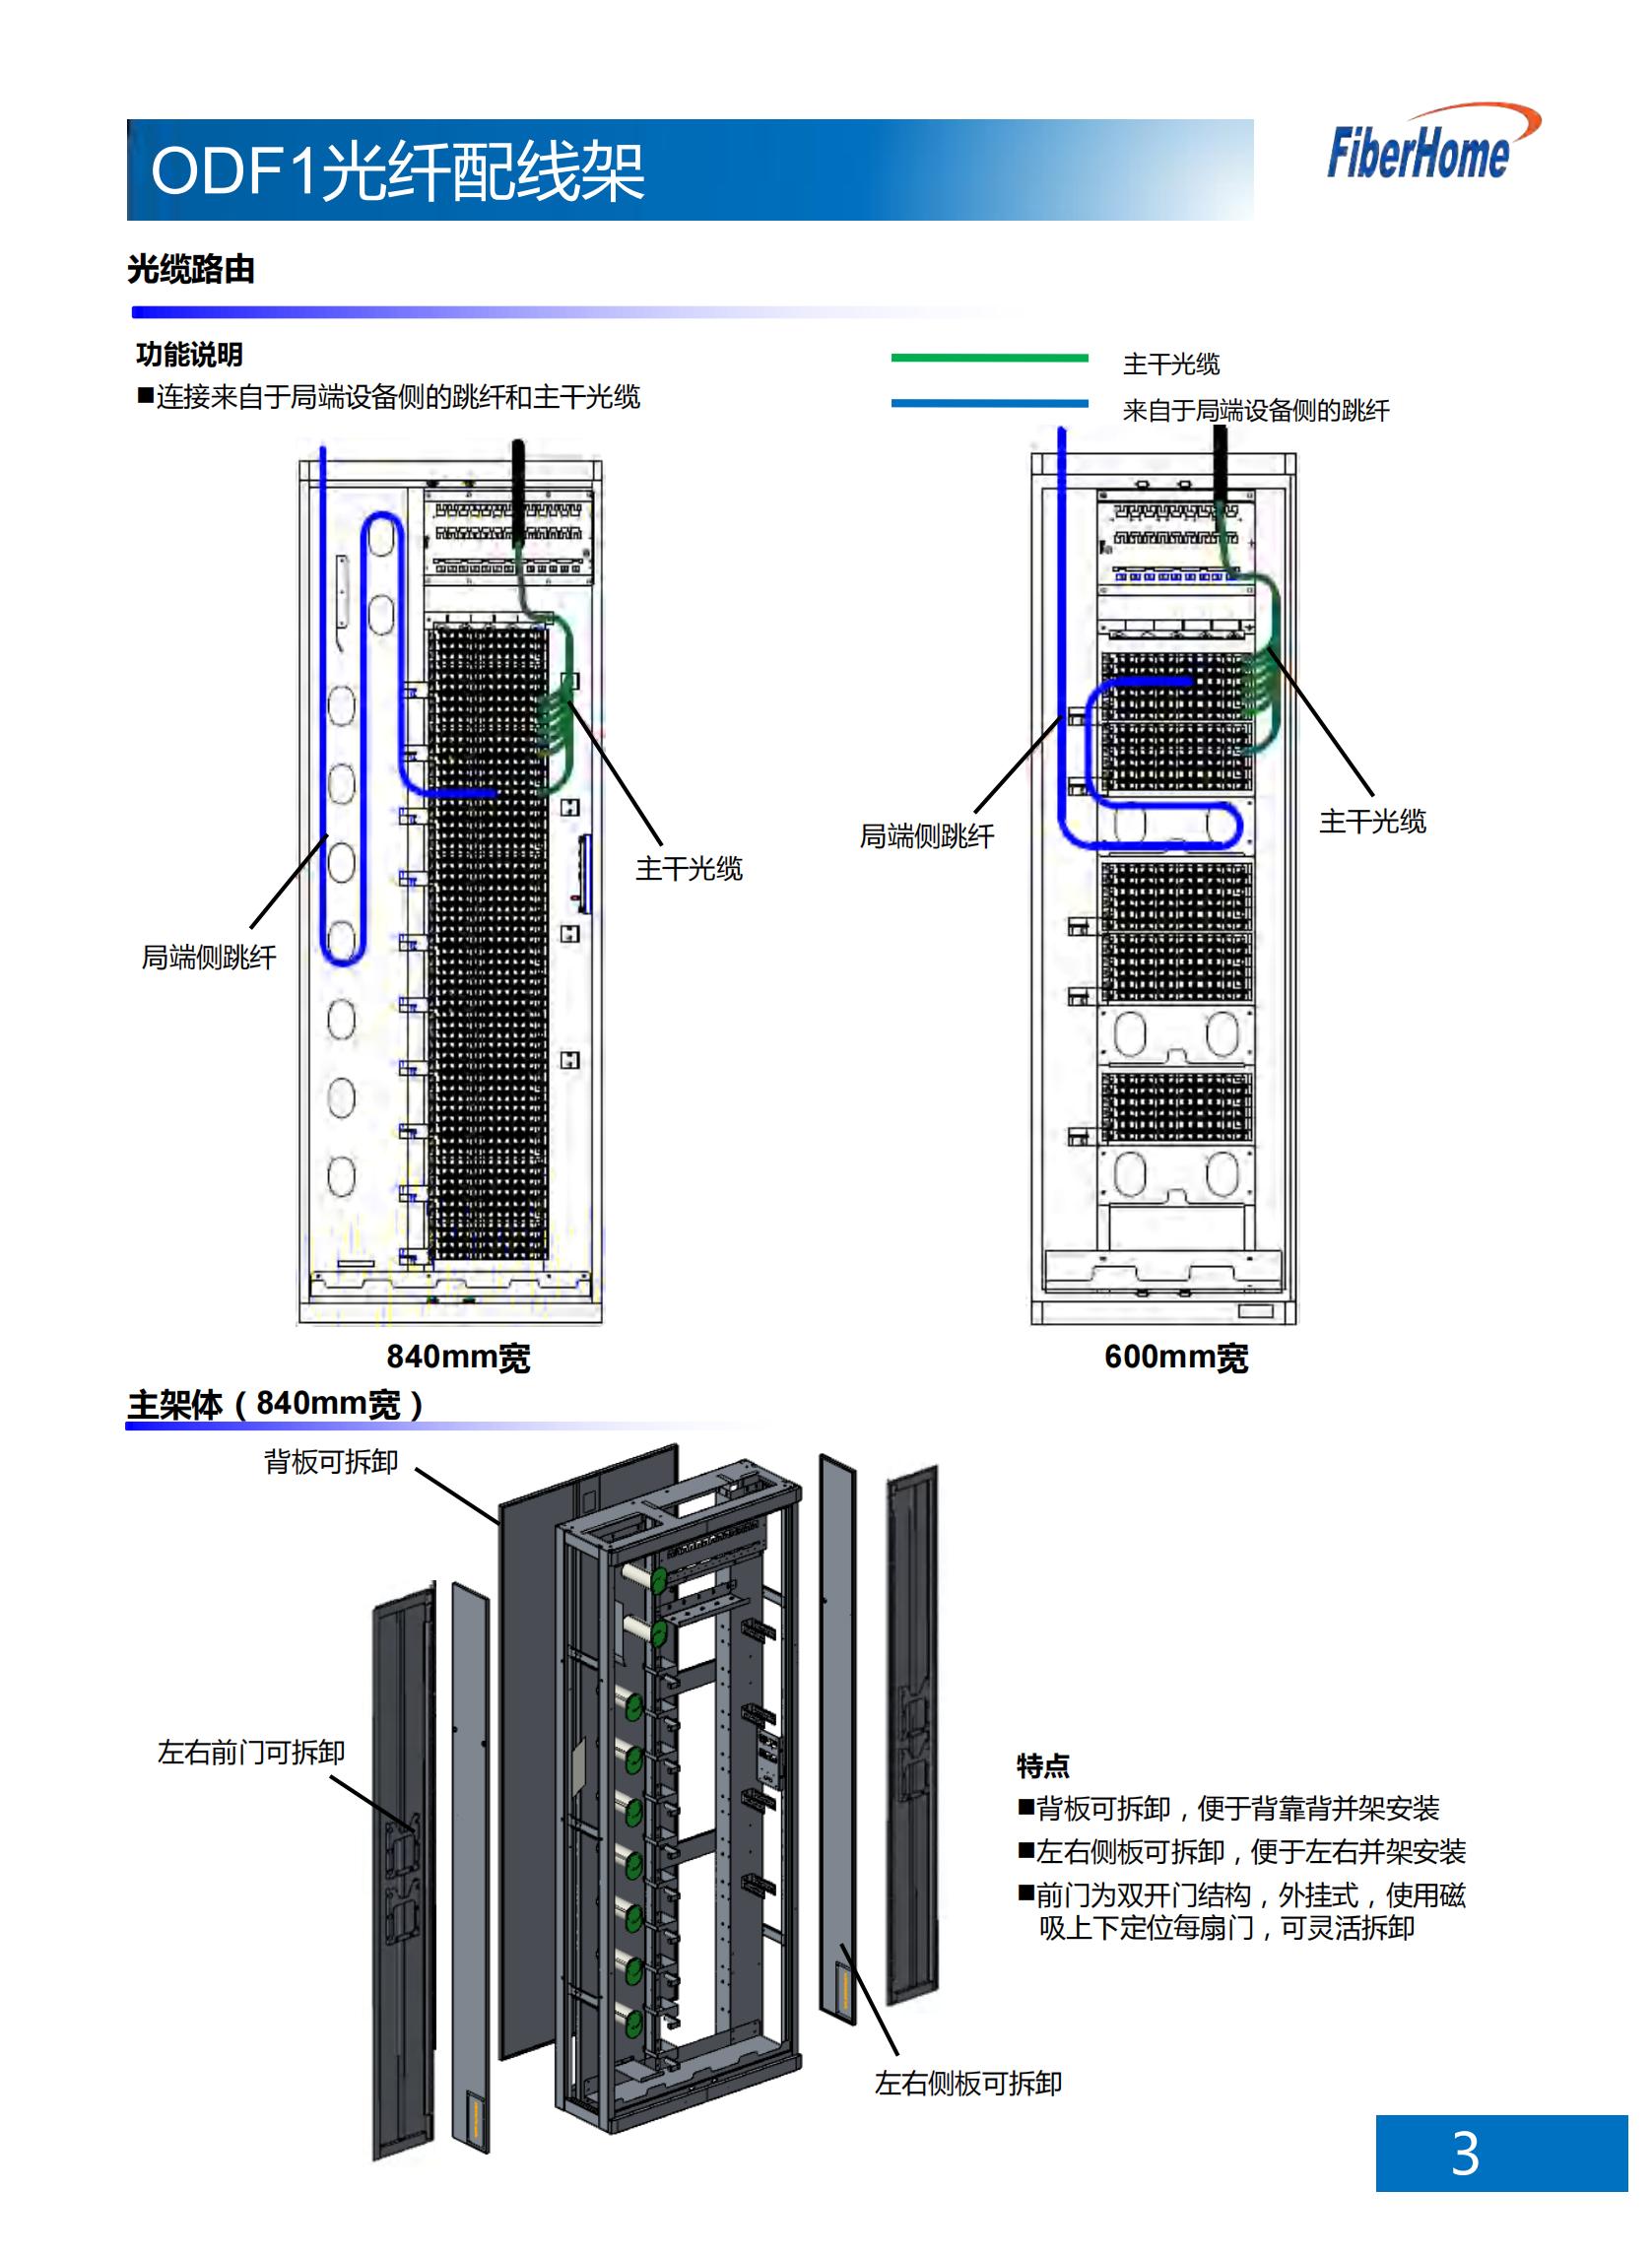 ODF101-576-A4-SC ODF optical fiber distribution frame (576-core floor-standing all include 12-core SC fusion integrated unit) with fiber storage unit)